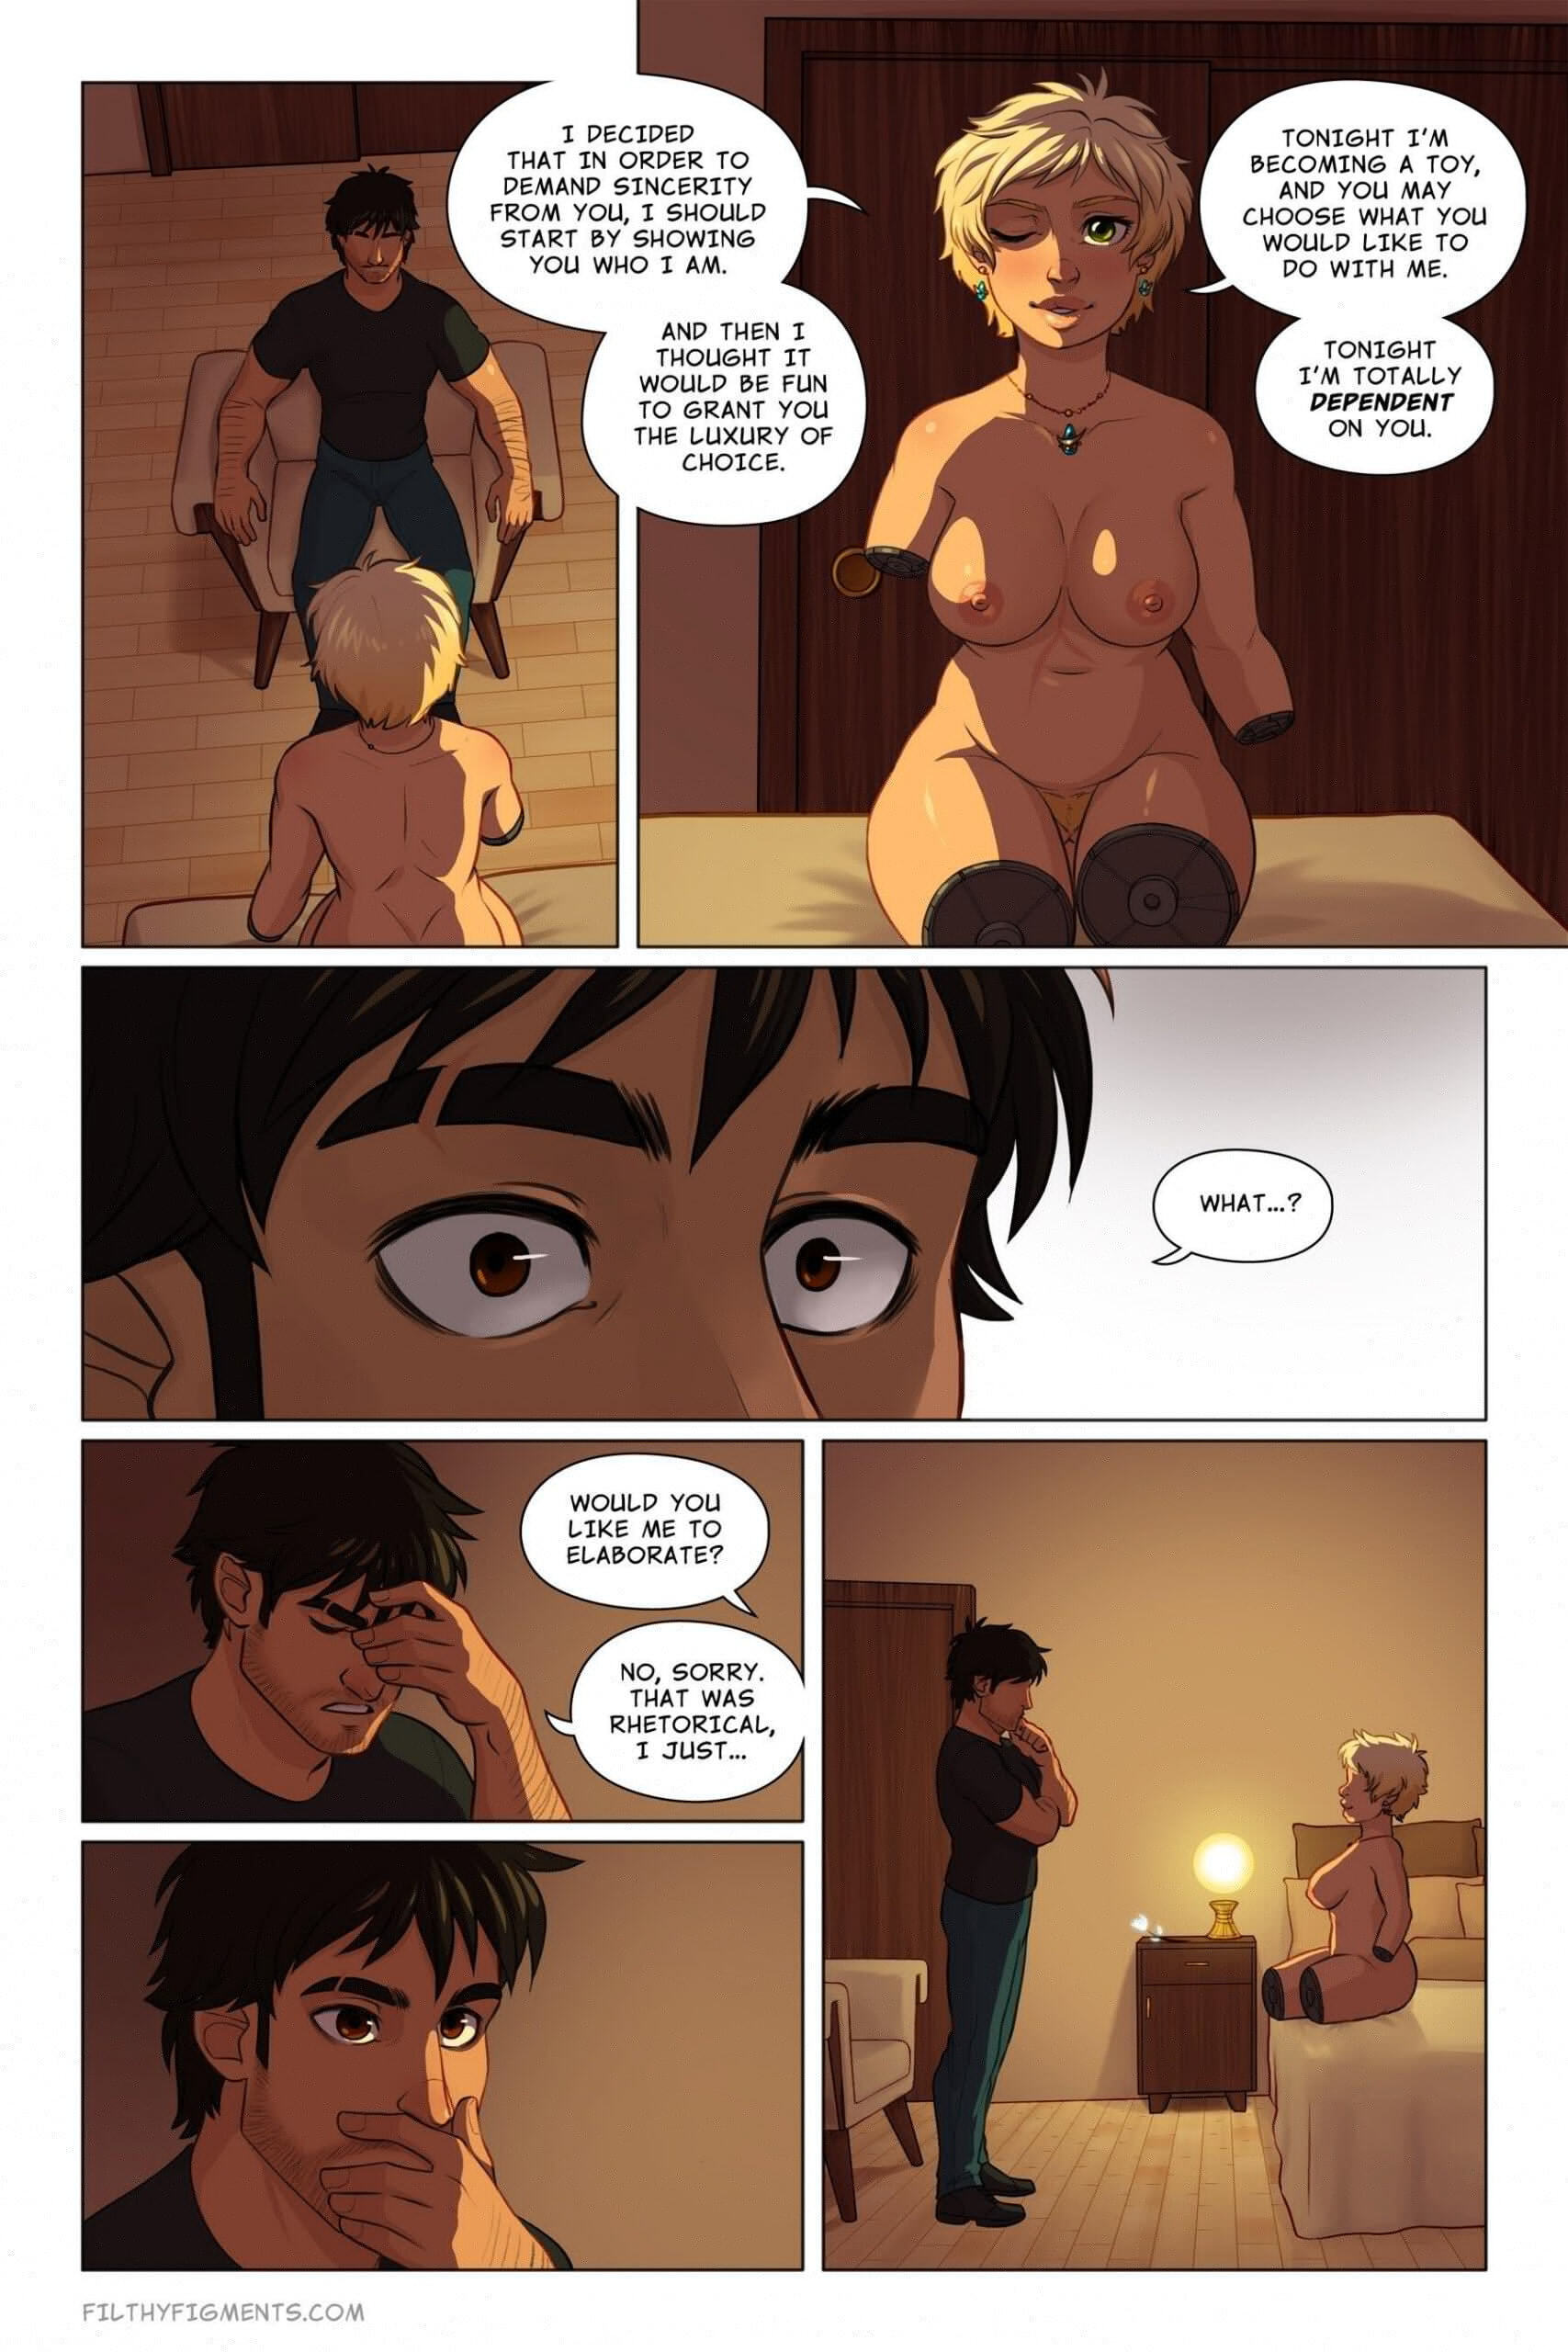 100 Percent 7 - With You - Page 26